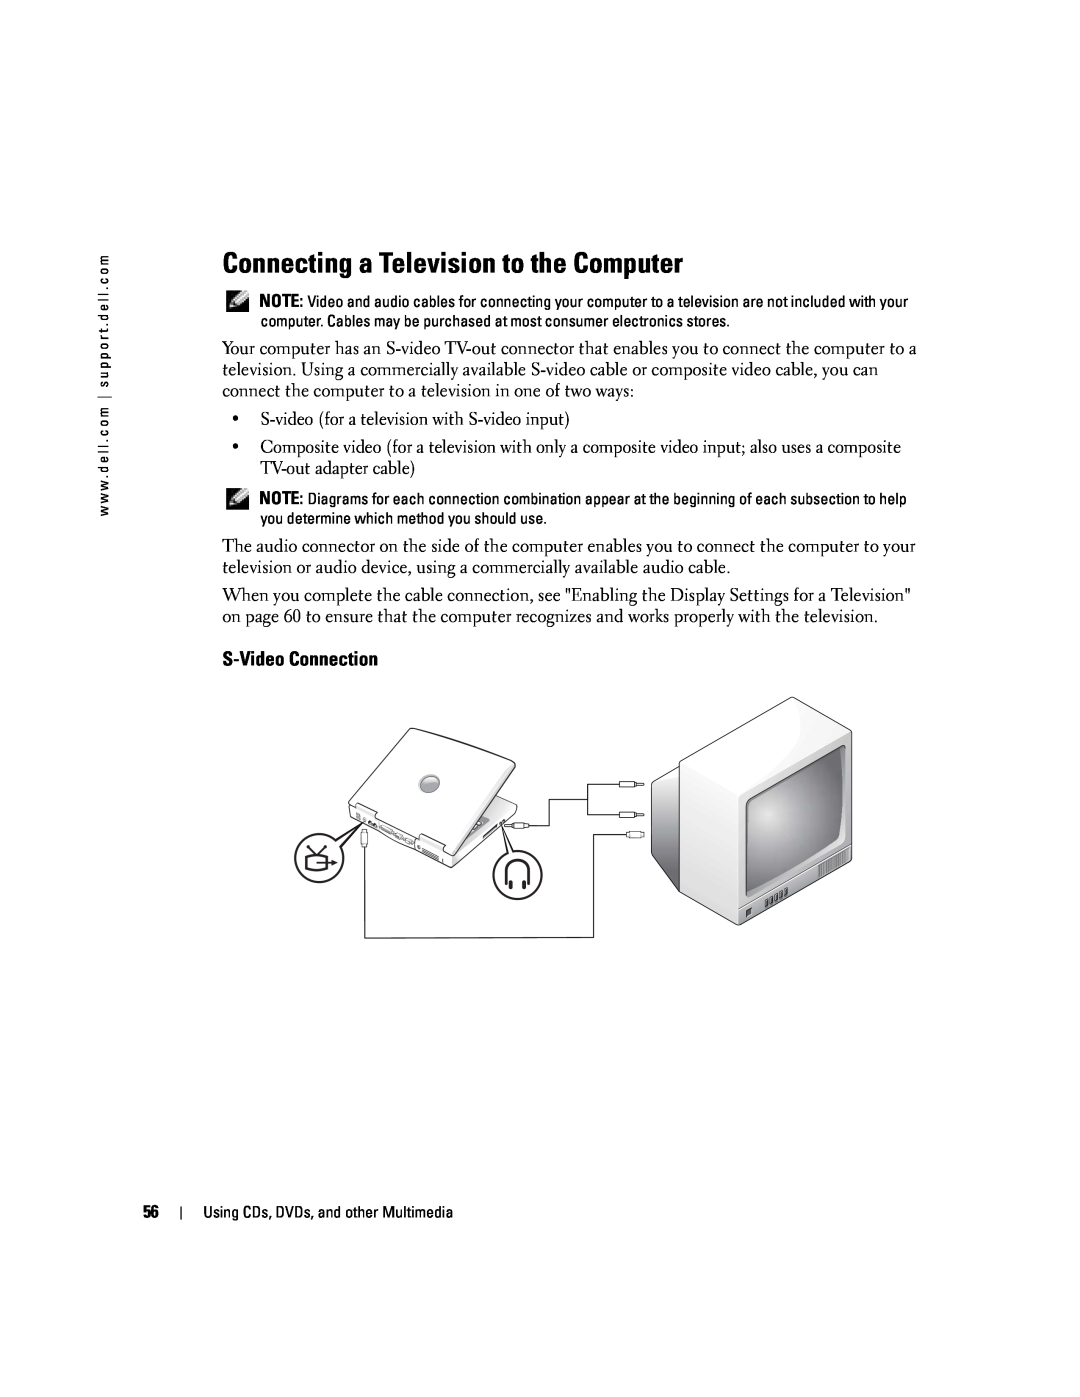 Dell PP10L owner manual Connecting a Television to the Computer, S-Video Connection 